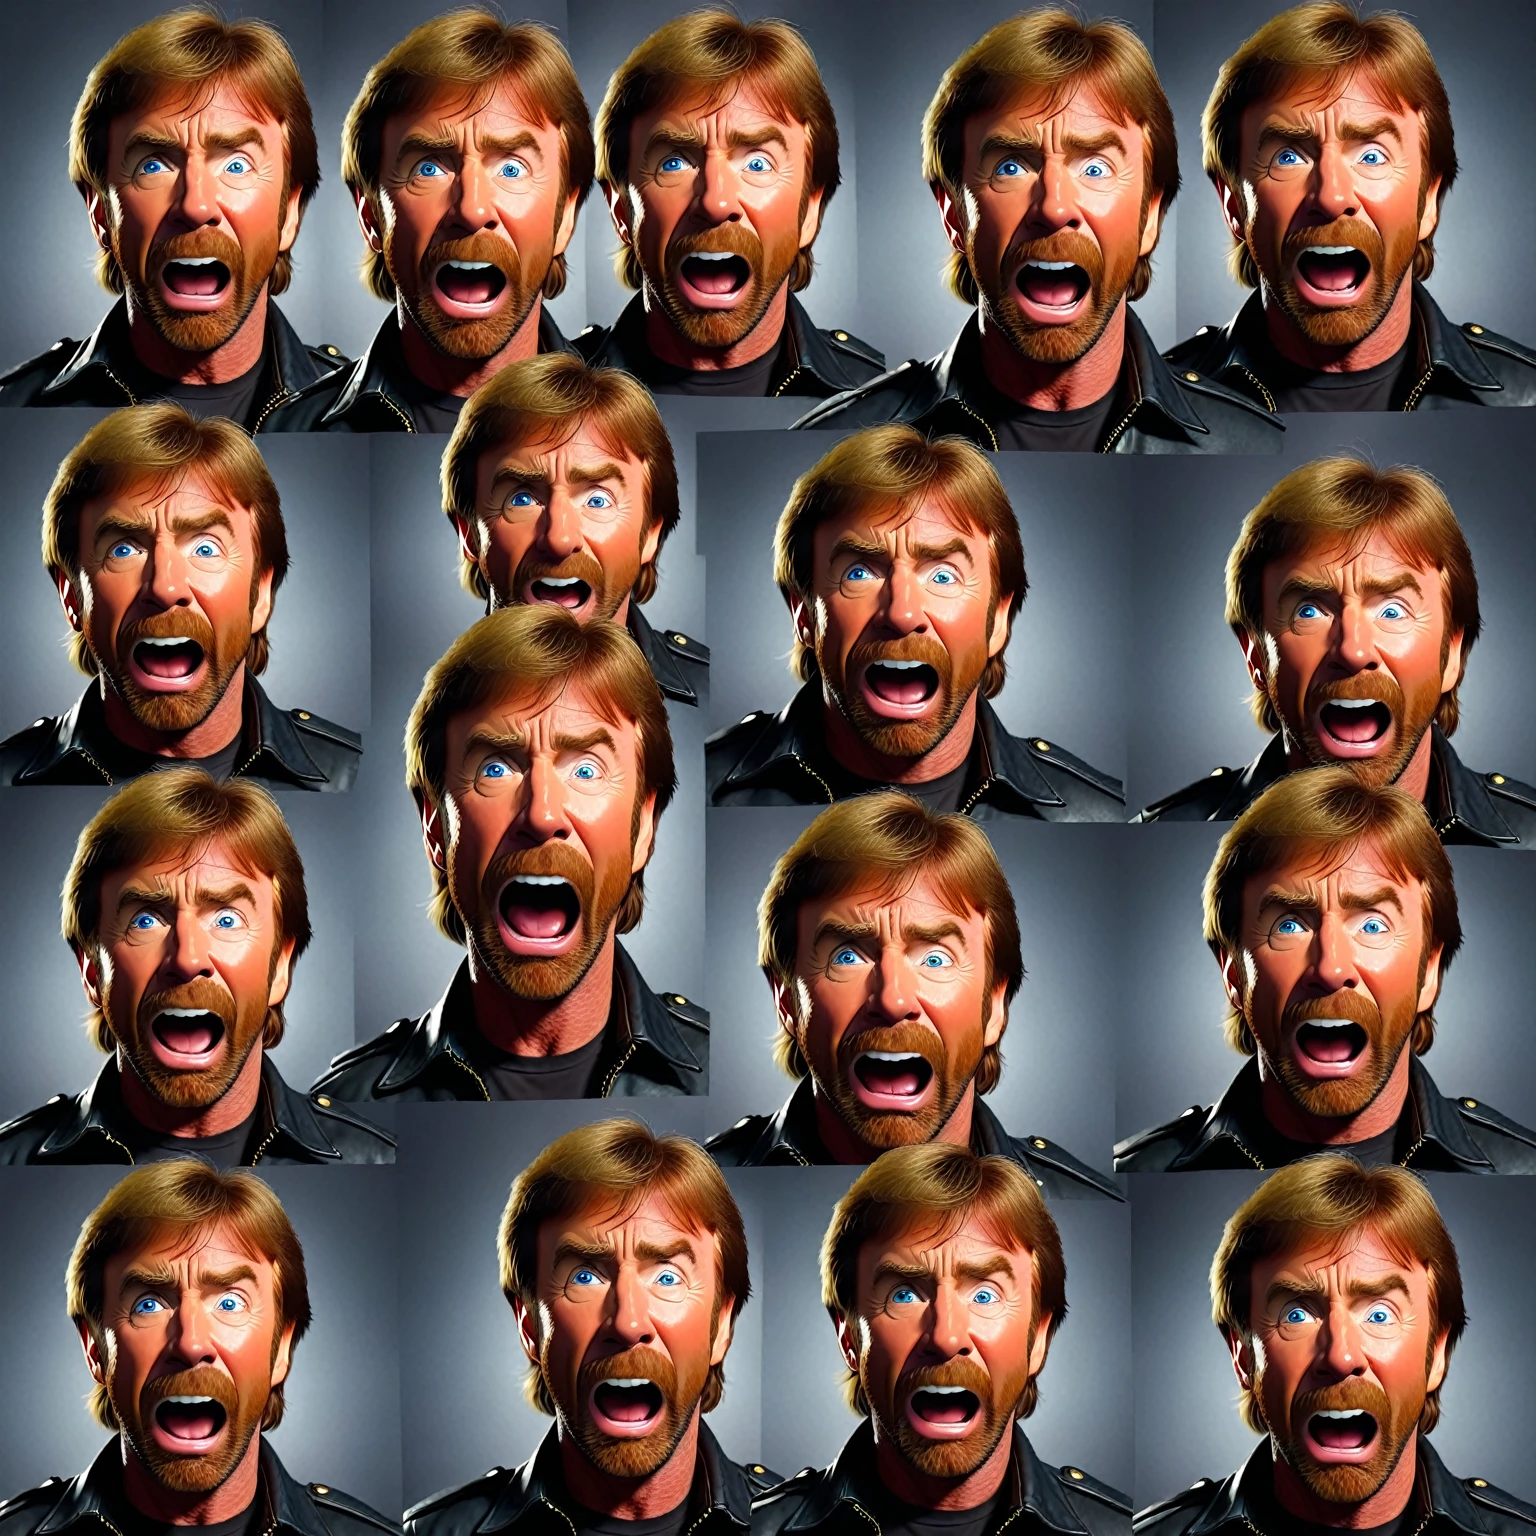 "The Emotions of Chuck Norris" meme
